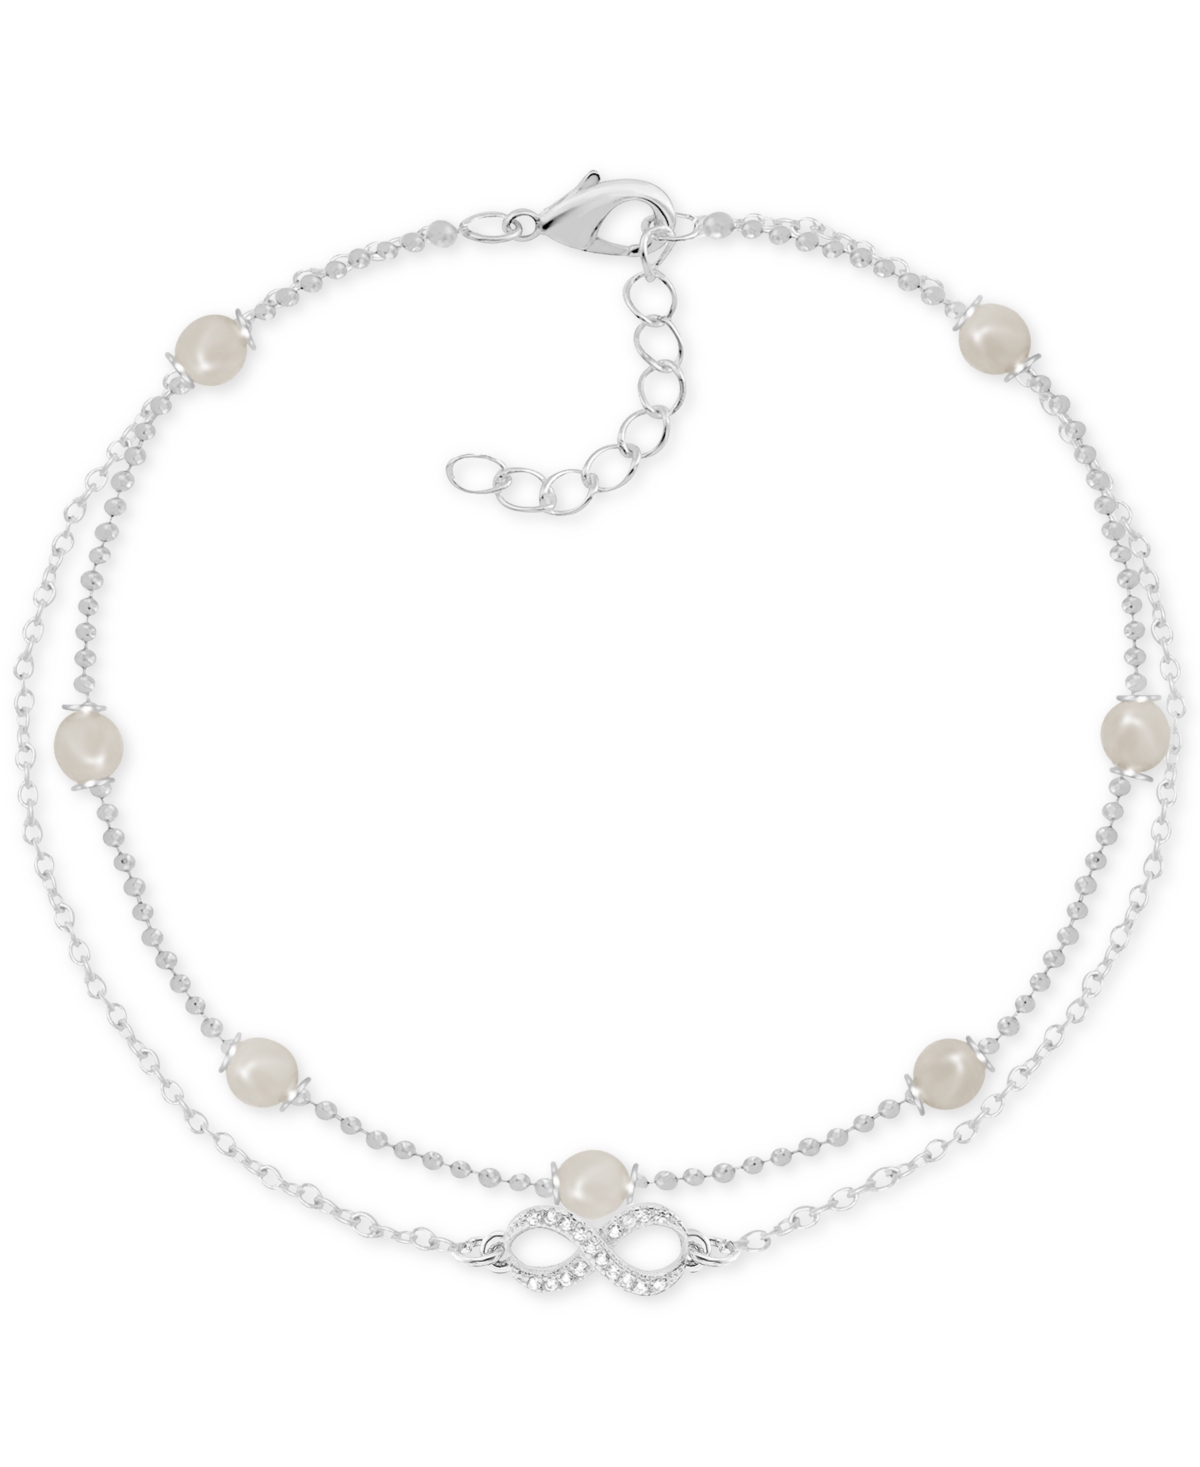 Imitation Pearl & Crystal Infinity Double Row Ankle Bracelet in Silver-Plate - Silver